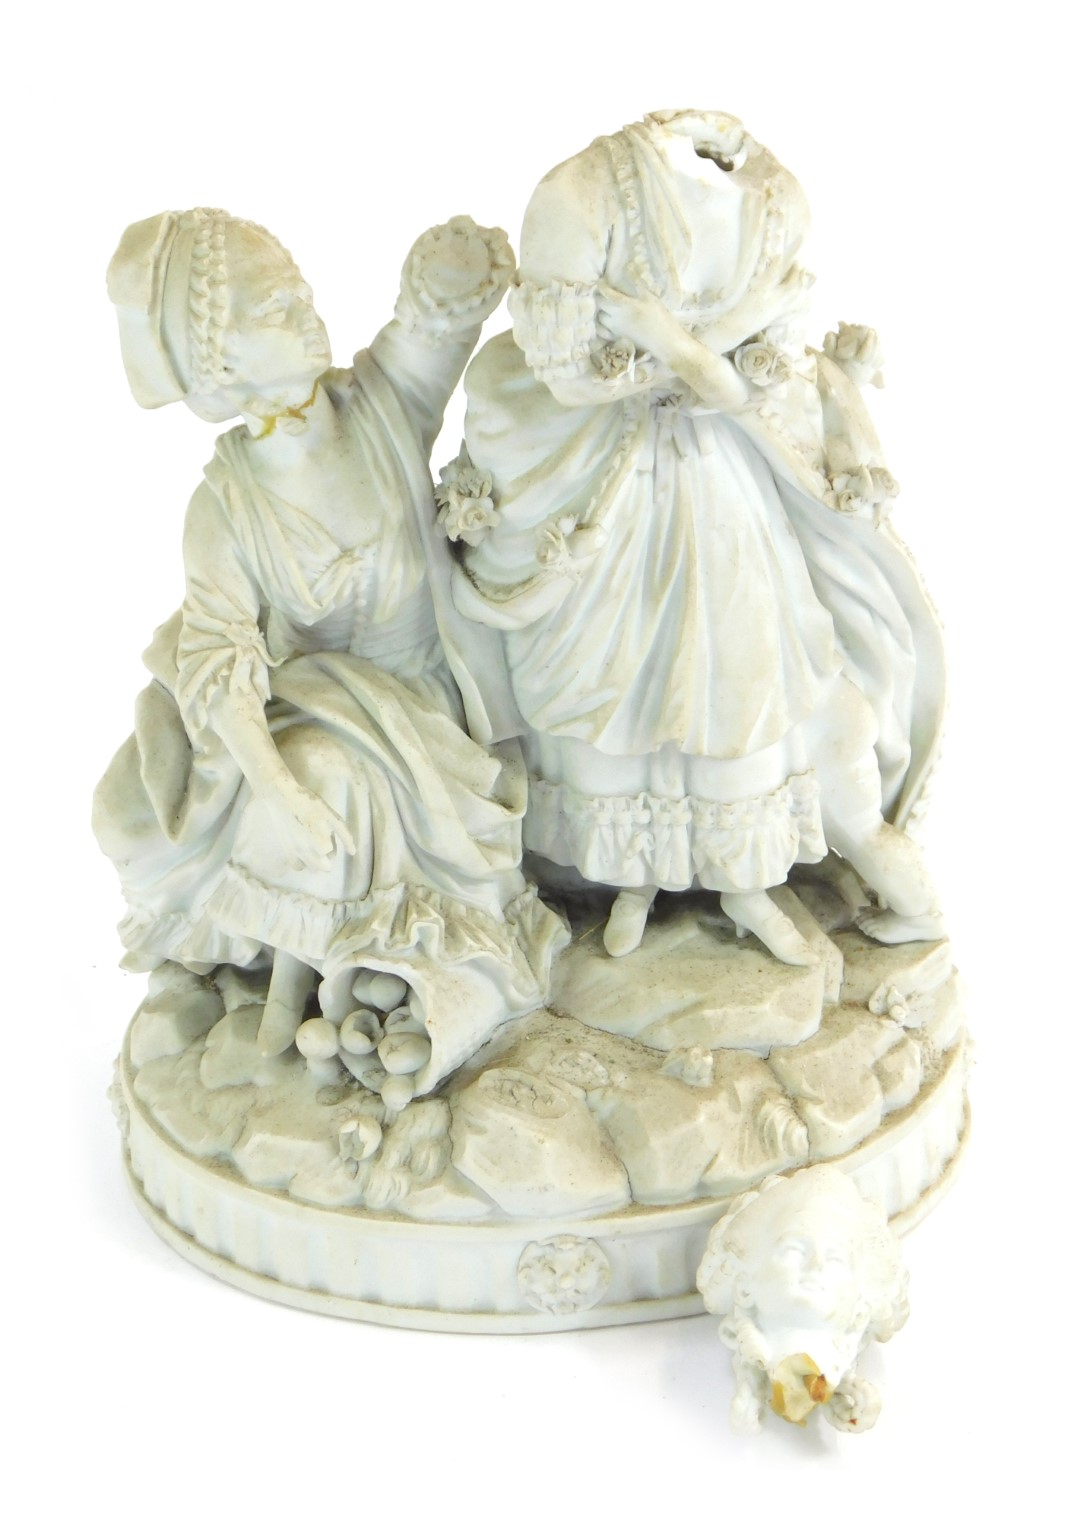 A 19thC Parian figure group, modelled in the form of two ladies, one seated beside a basket of fruit